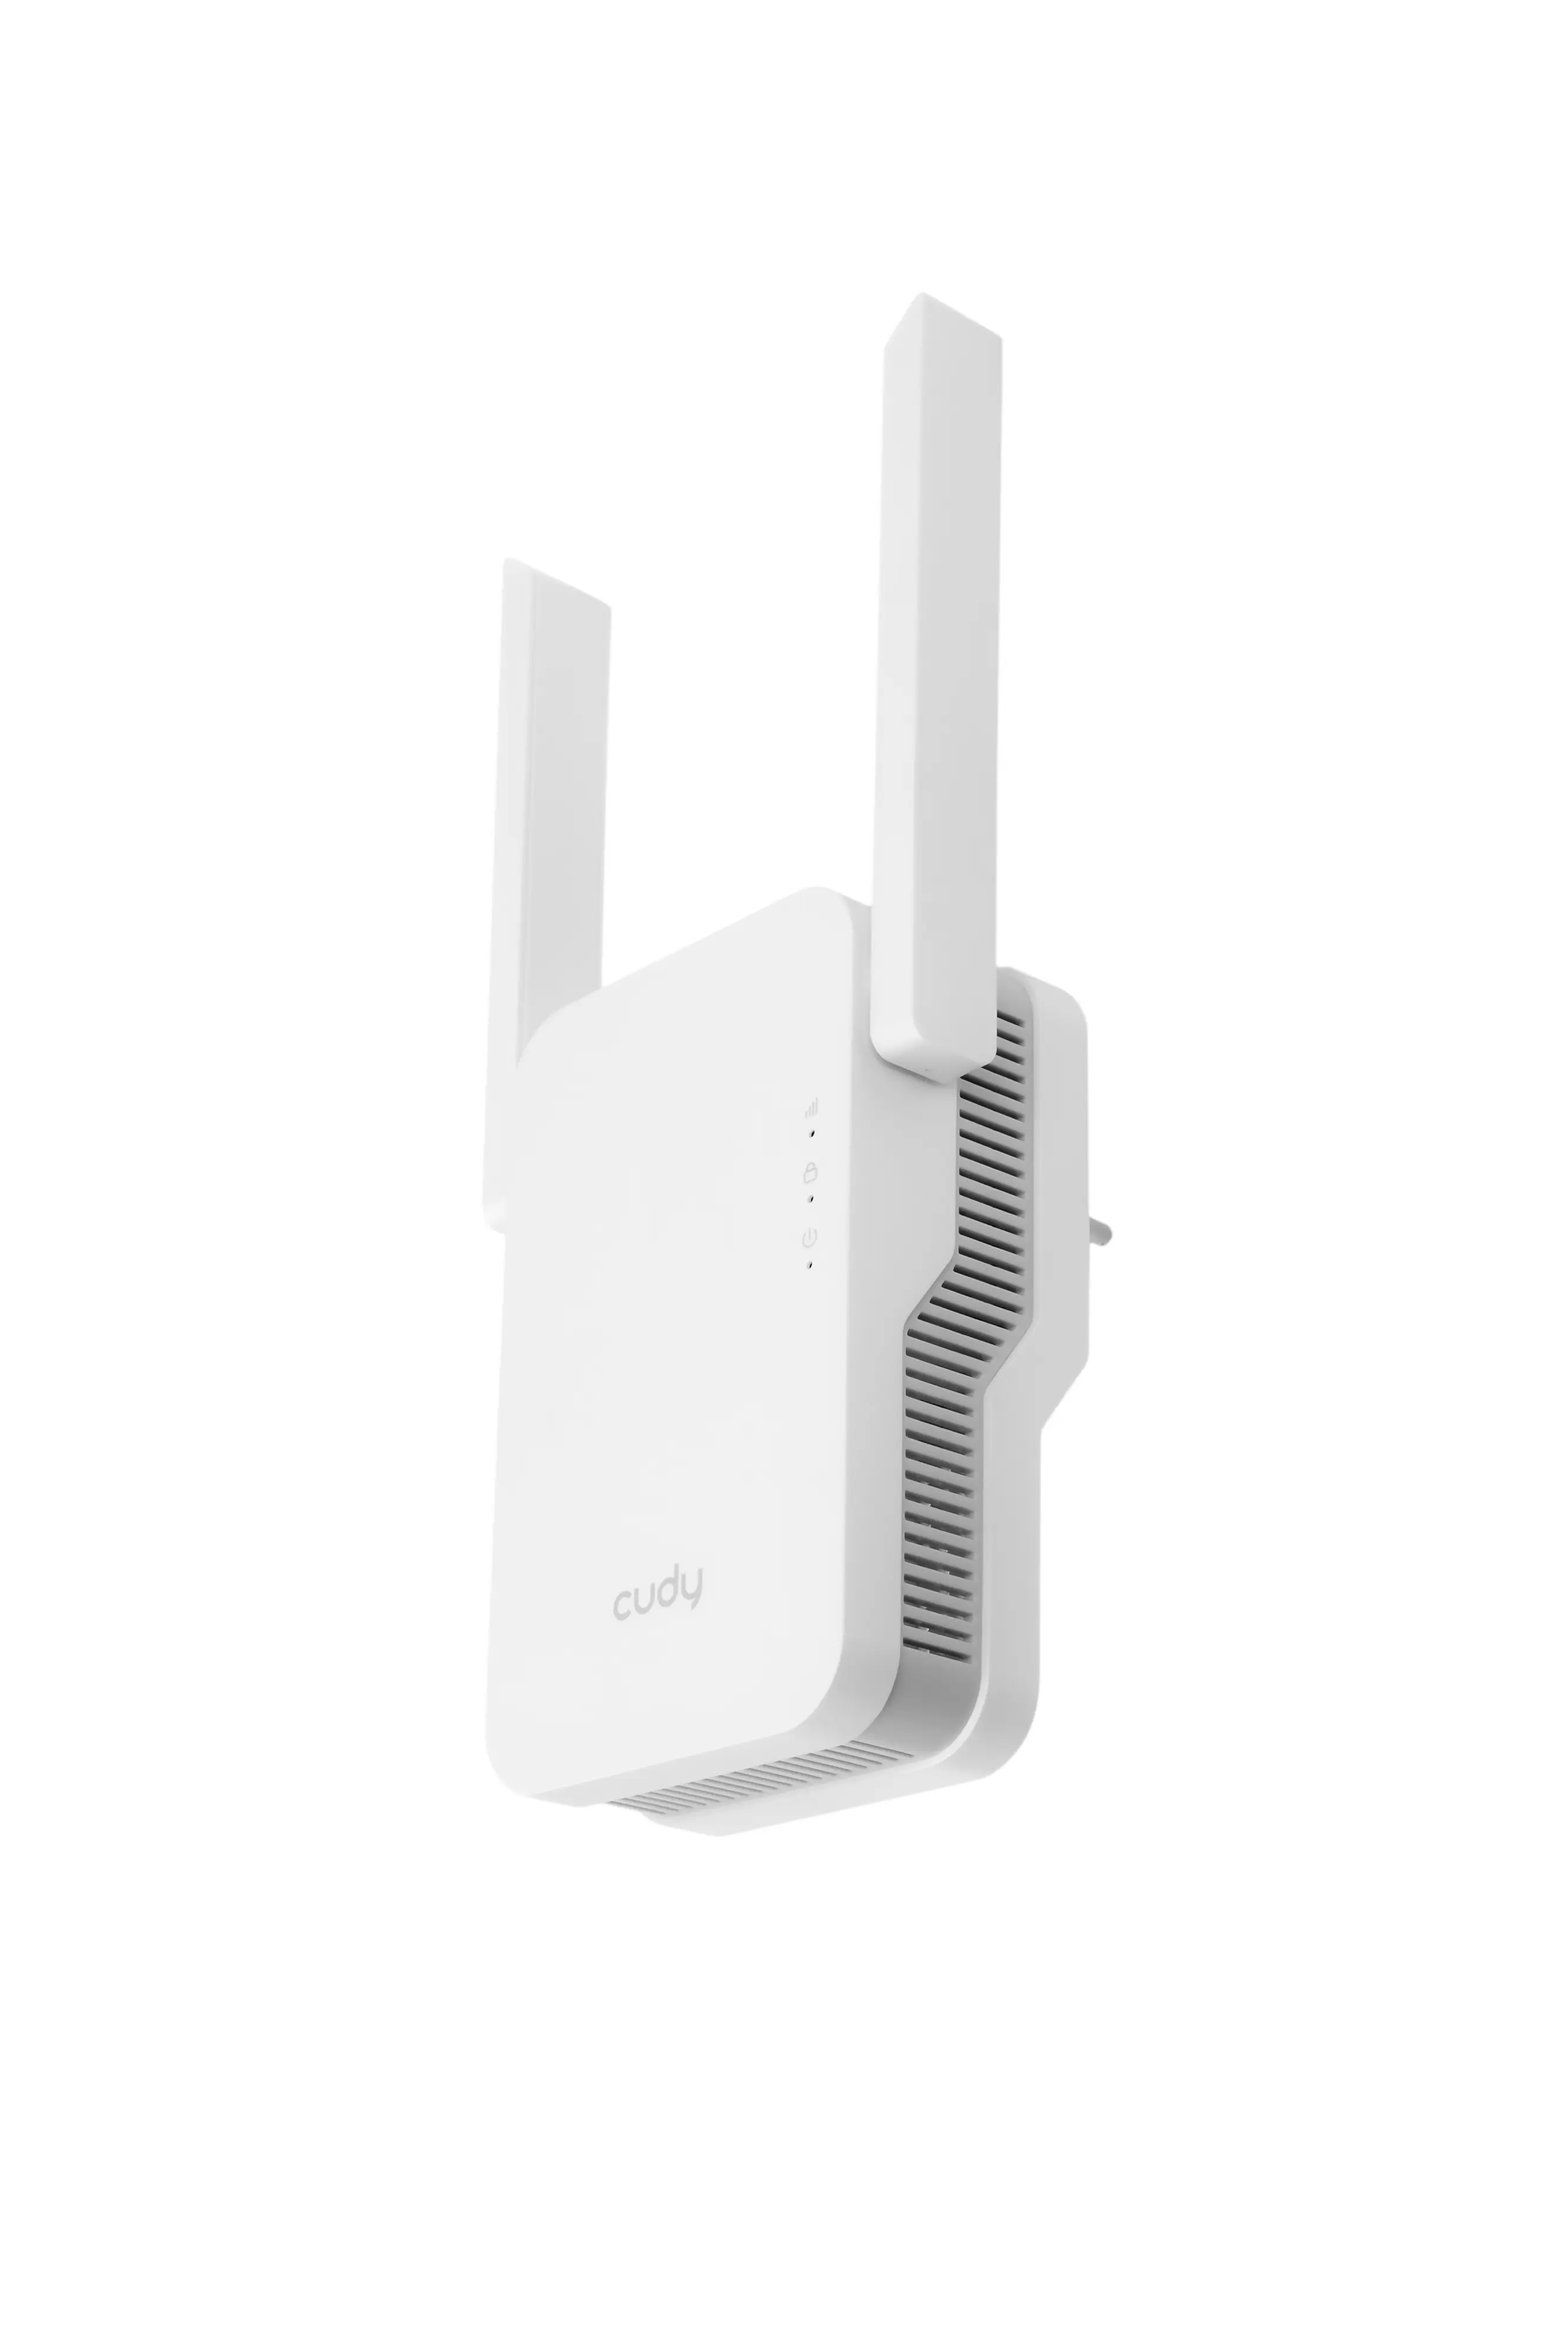 Zestaw Router Mesh Cudy M1800 AX1800 Dual Band WiFi 6 zestaw 2szt. + Repeater Cudy RE1800